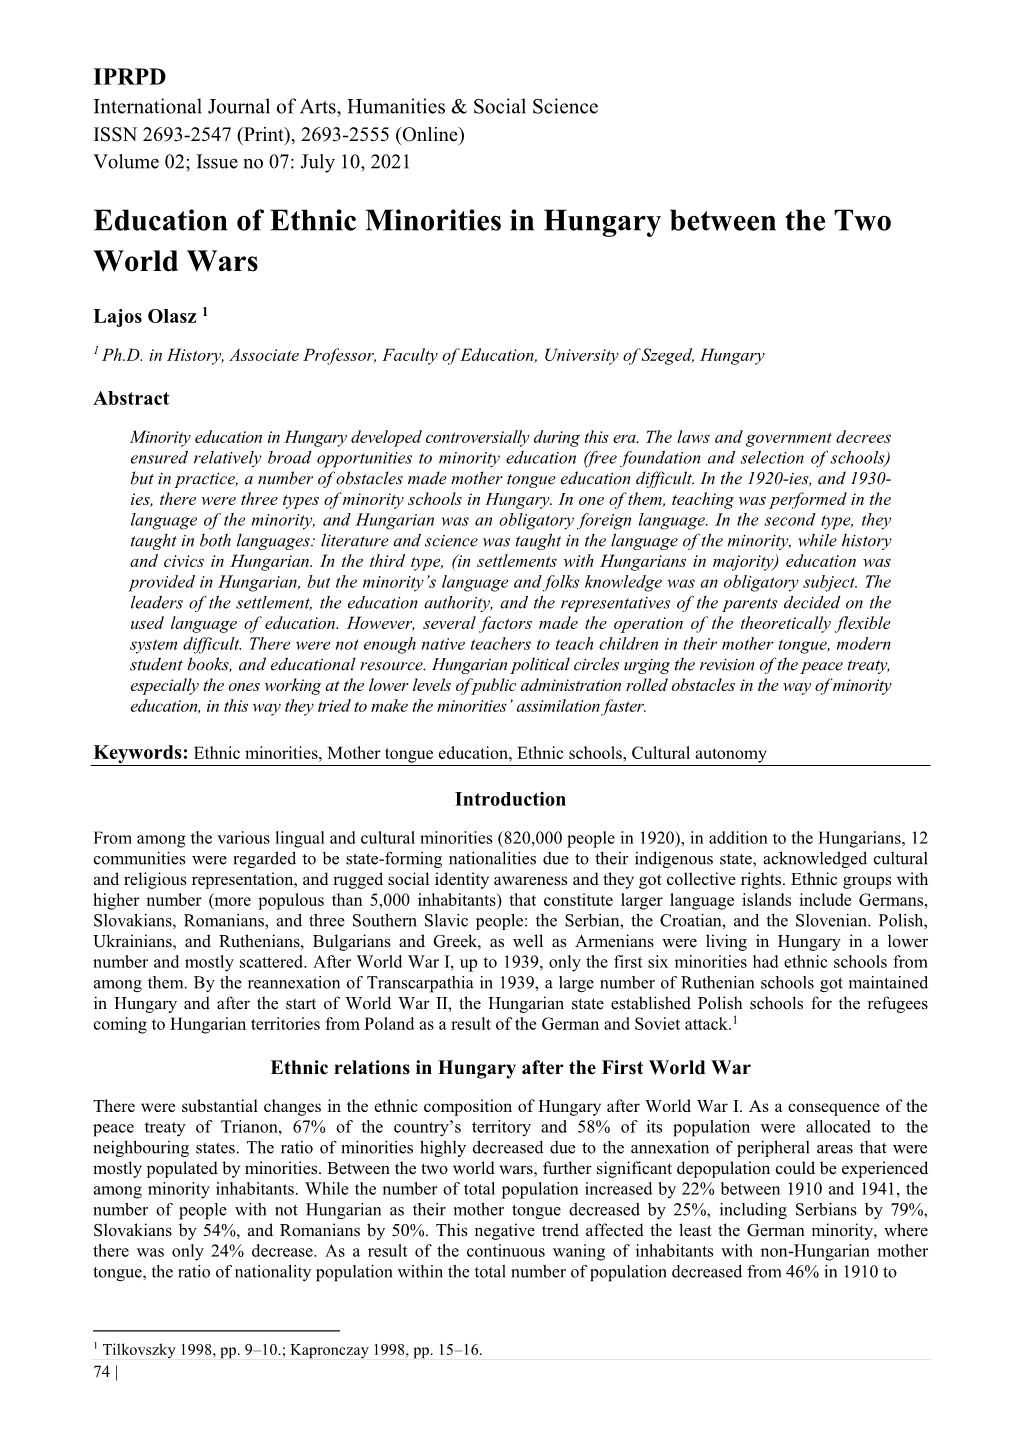 Education of Ethnic Minorities in Hungary Between the Two World Wars